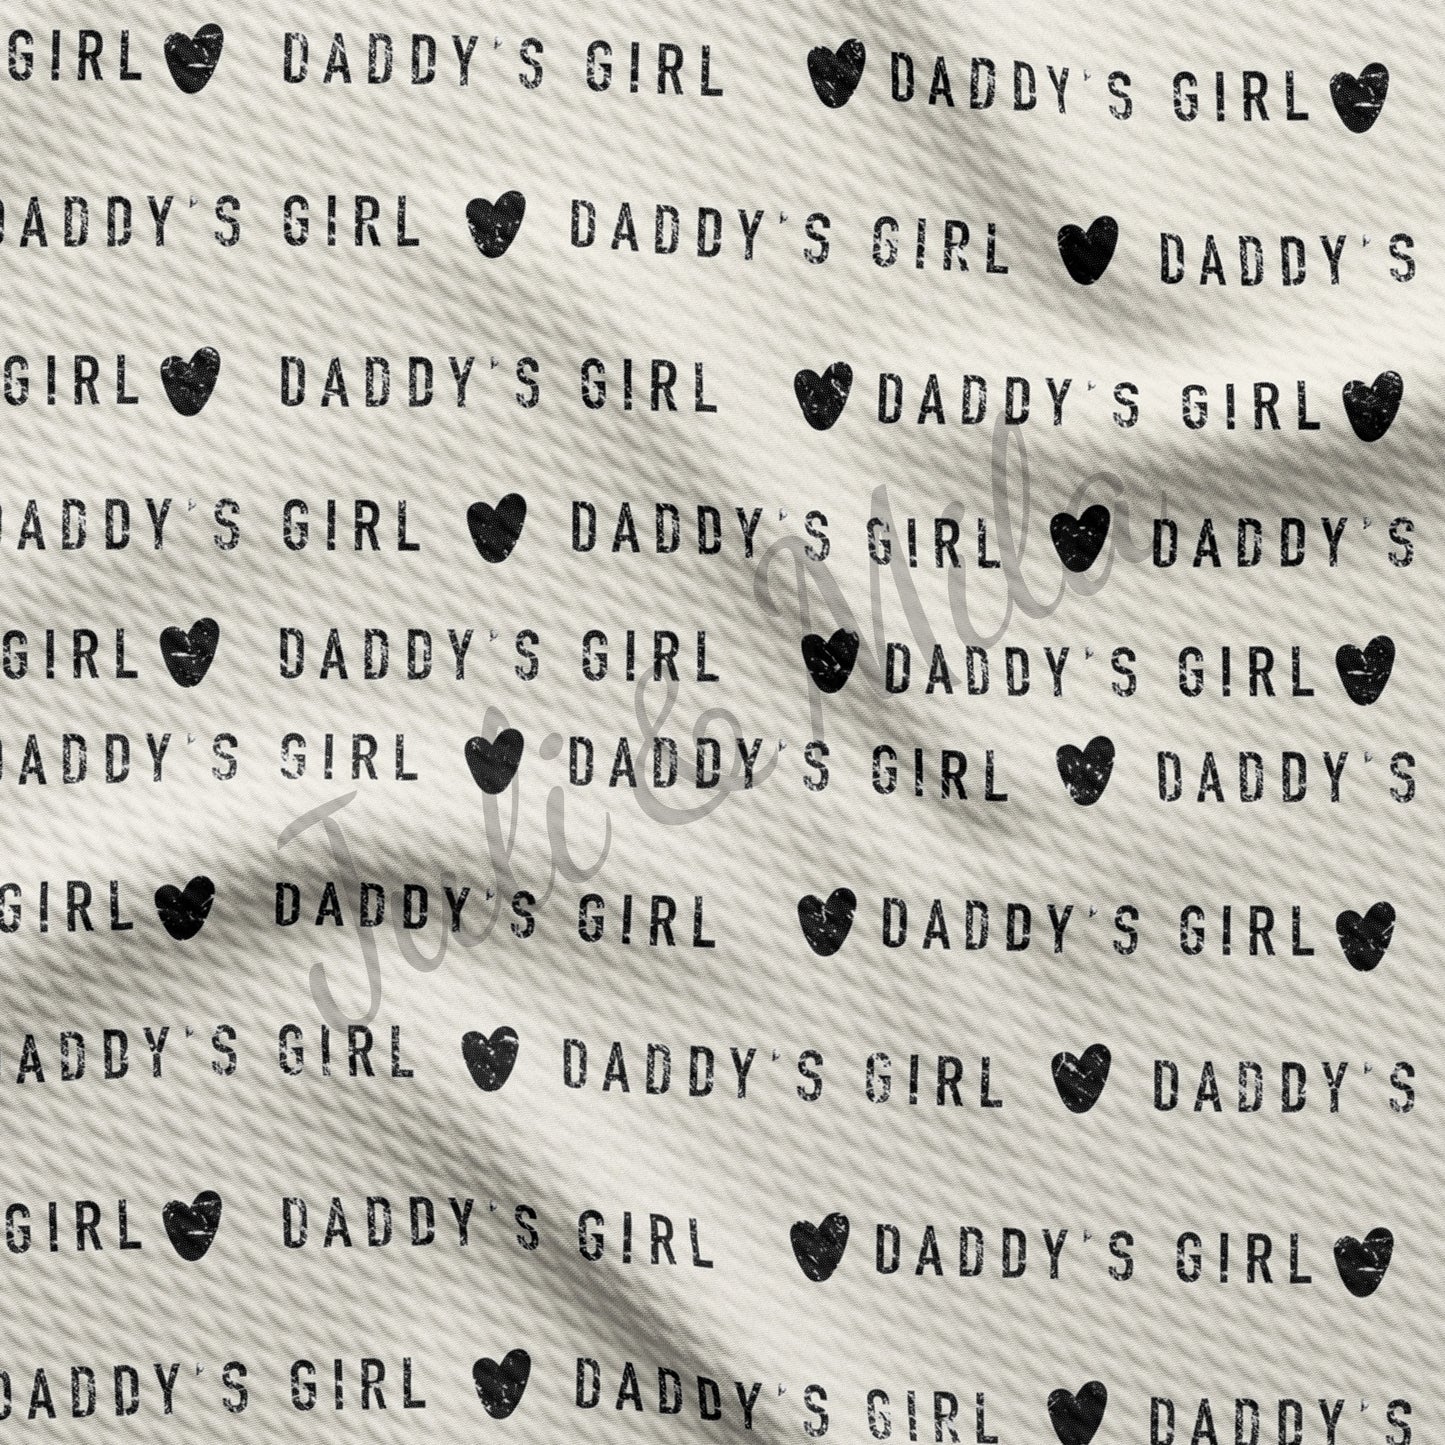 Daddys Girl  Bullet Textured Fabric (Daddy's Girl 3)